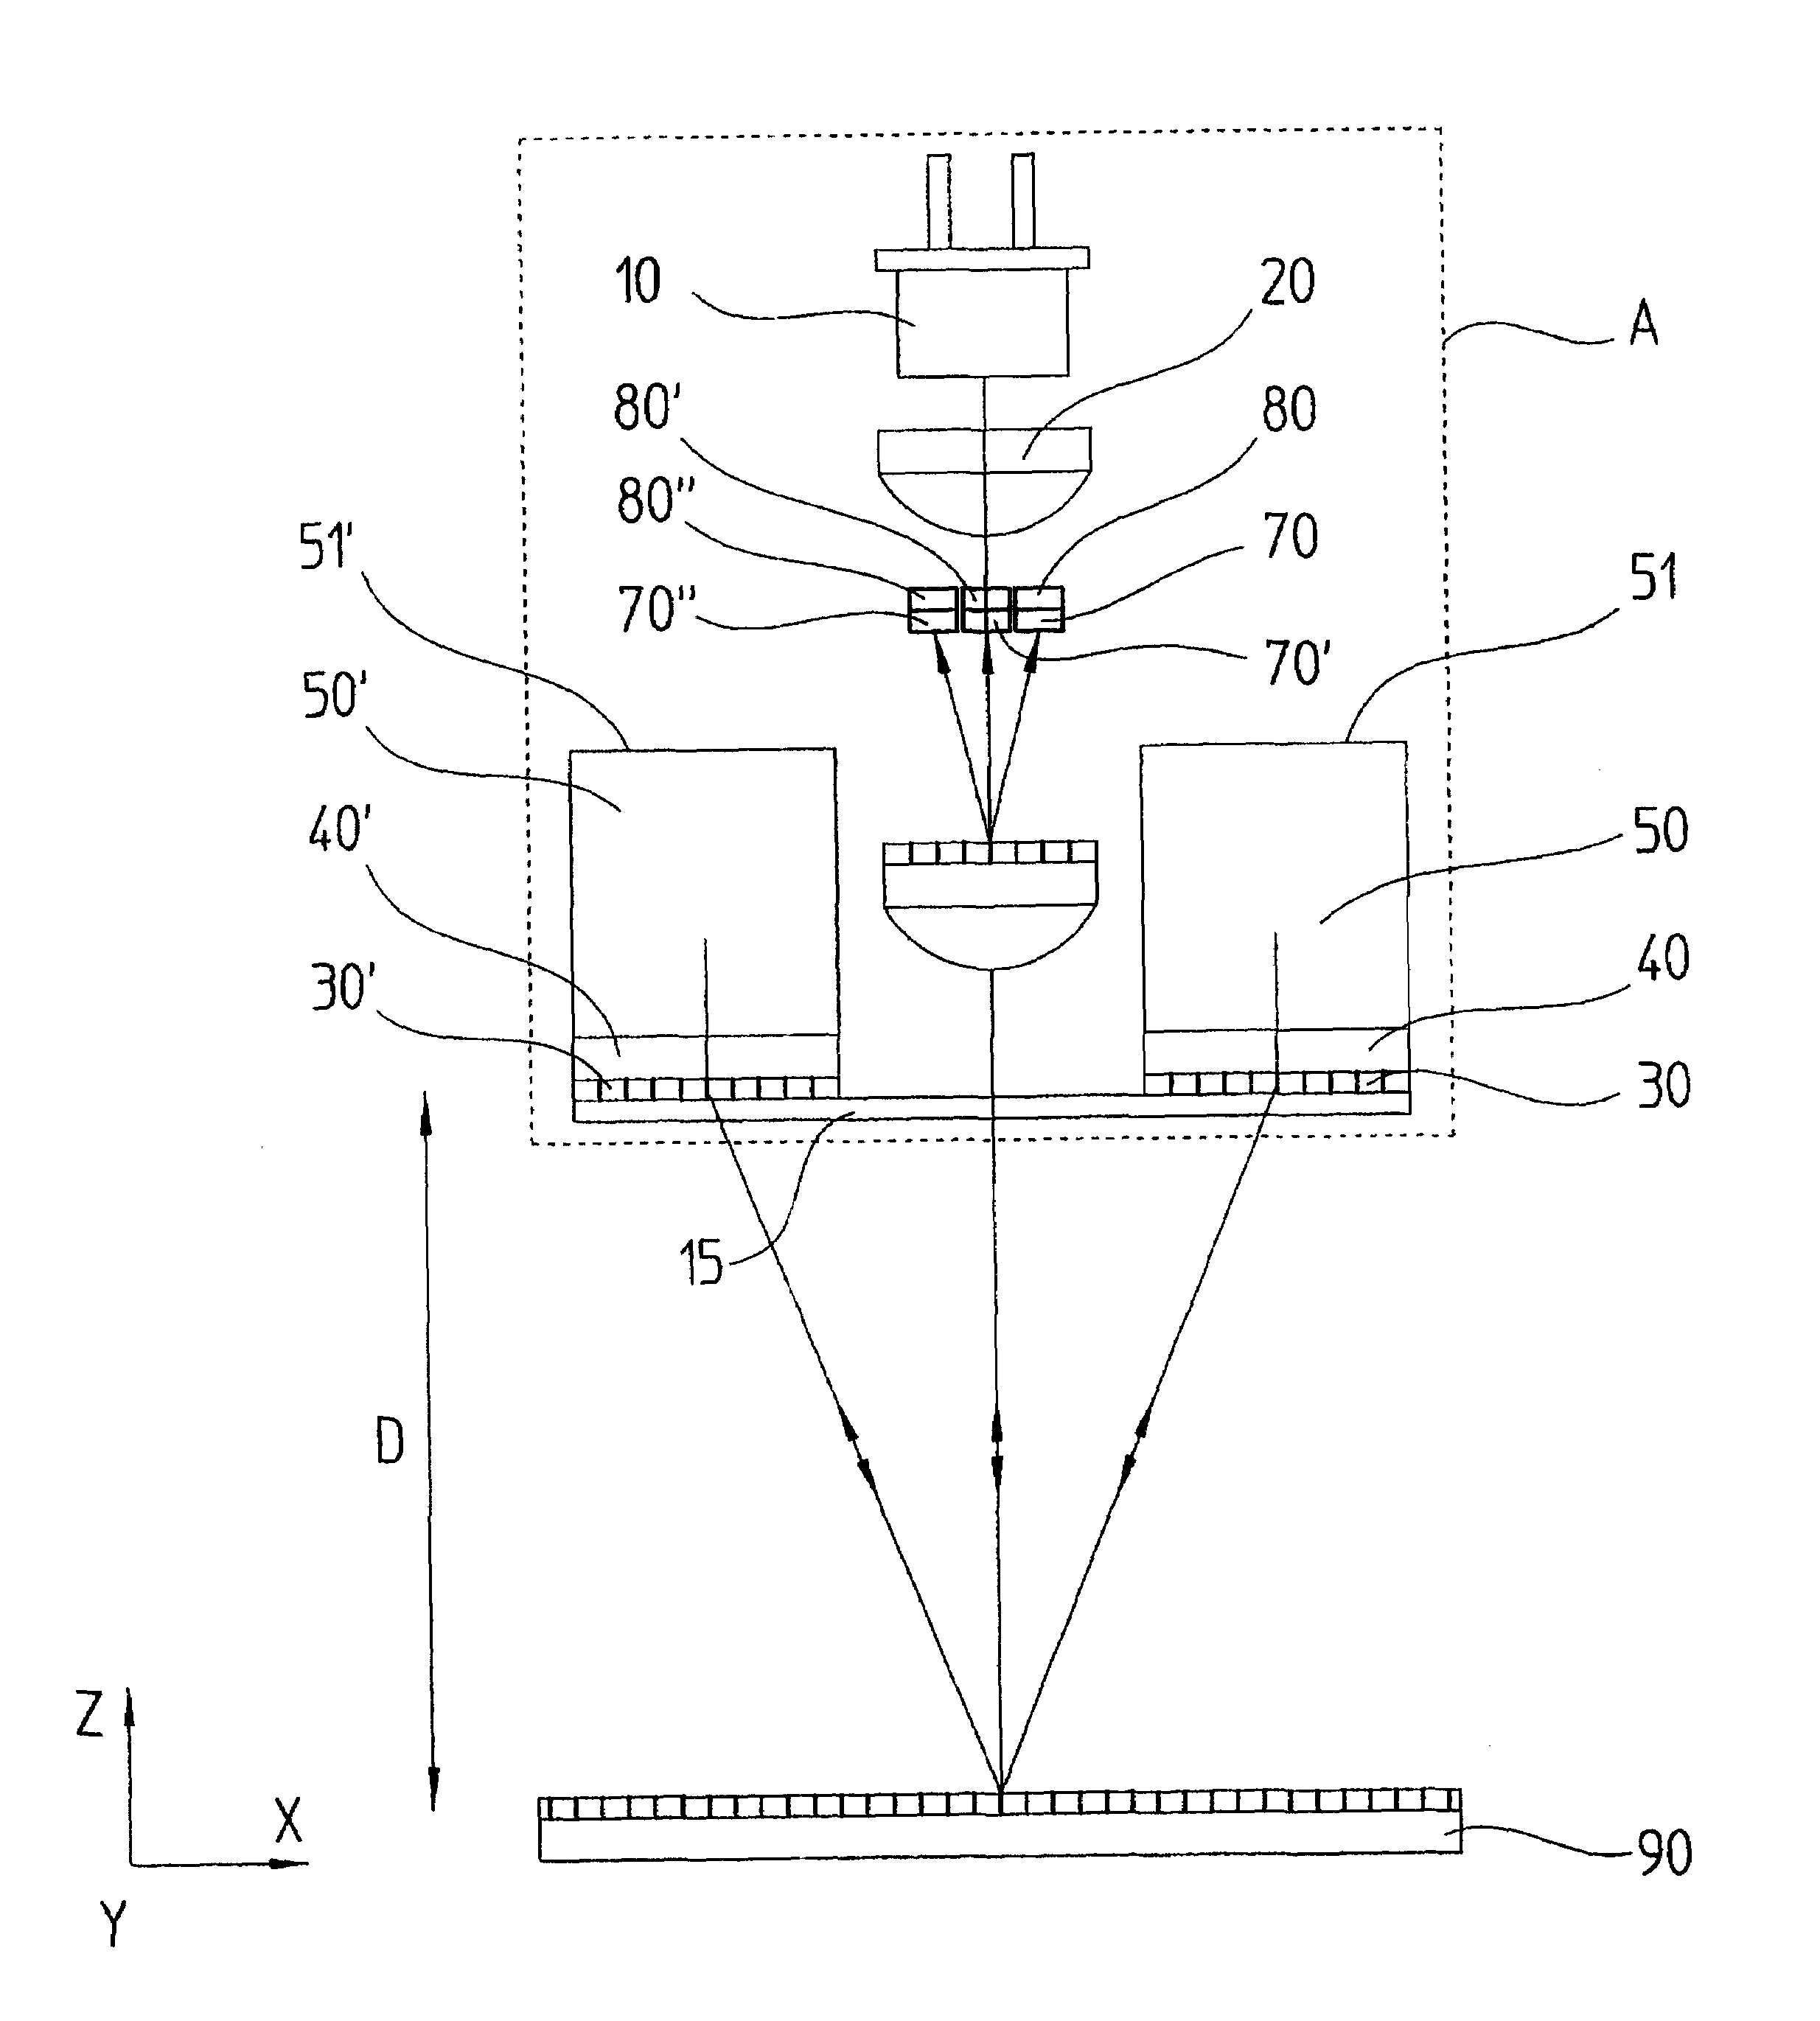 Position measuring device